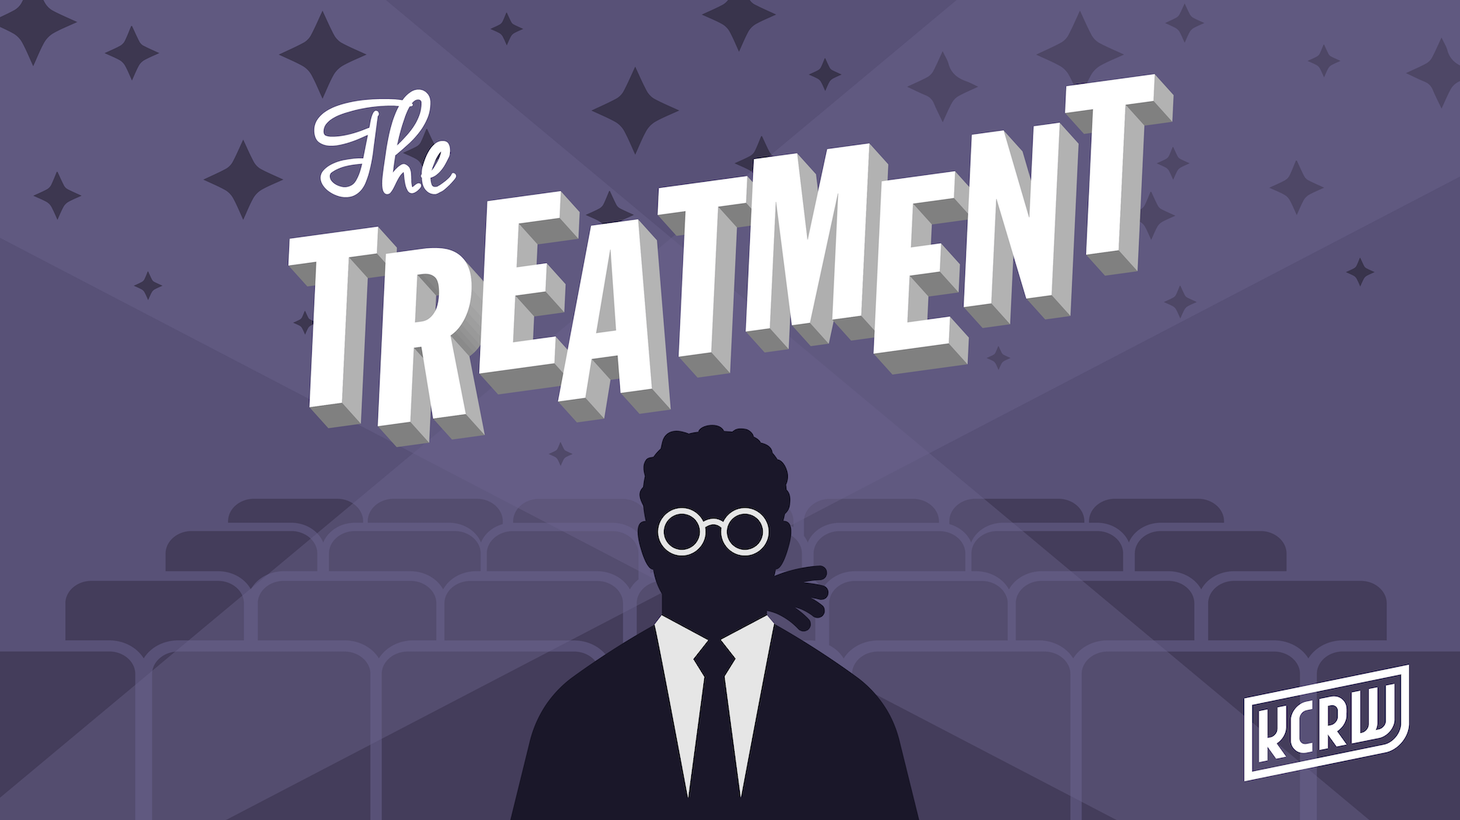 If you think social satire is dead in American Cinema, then you haven't seen the movies of Alexander Payne, which include "Citizen Ruth" and "Election".  Alexander joins Elvis this afternoon on "The Treatment".